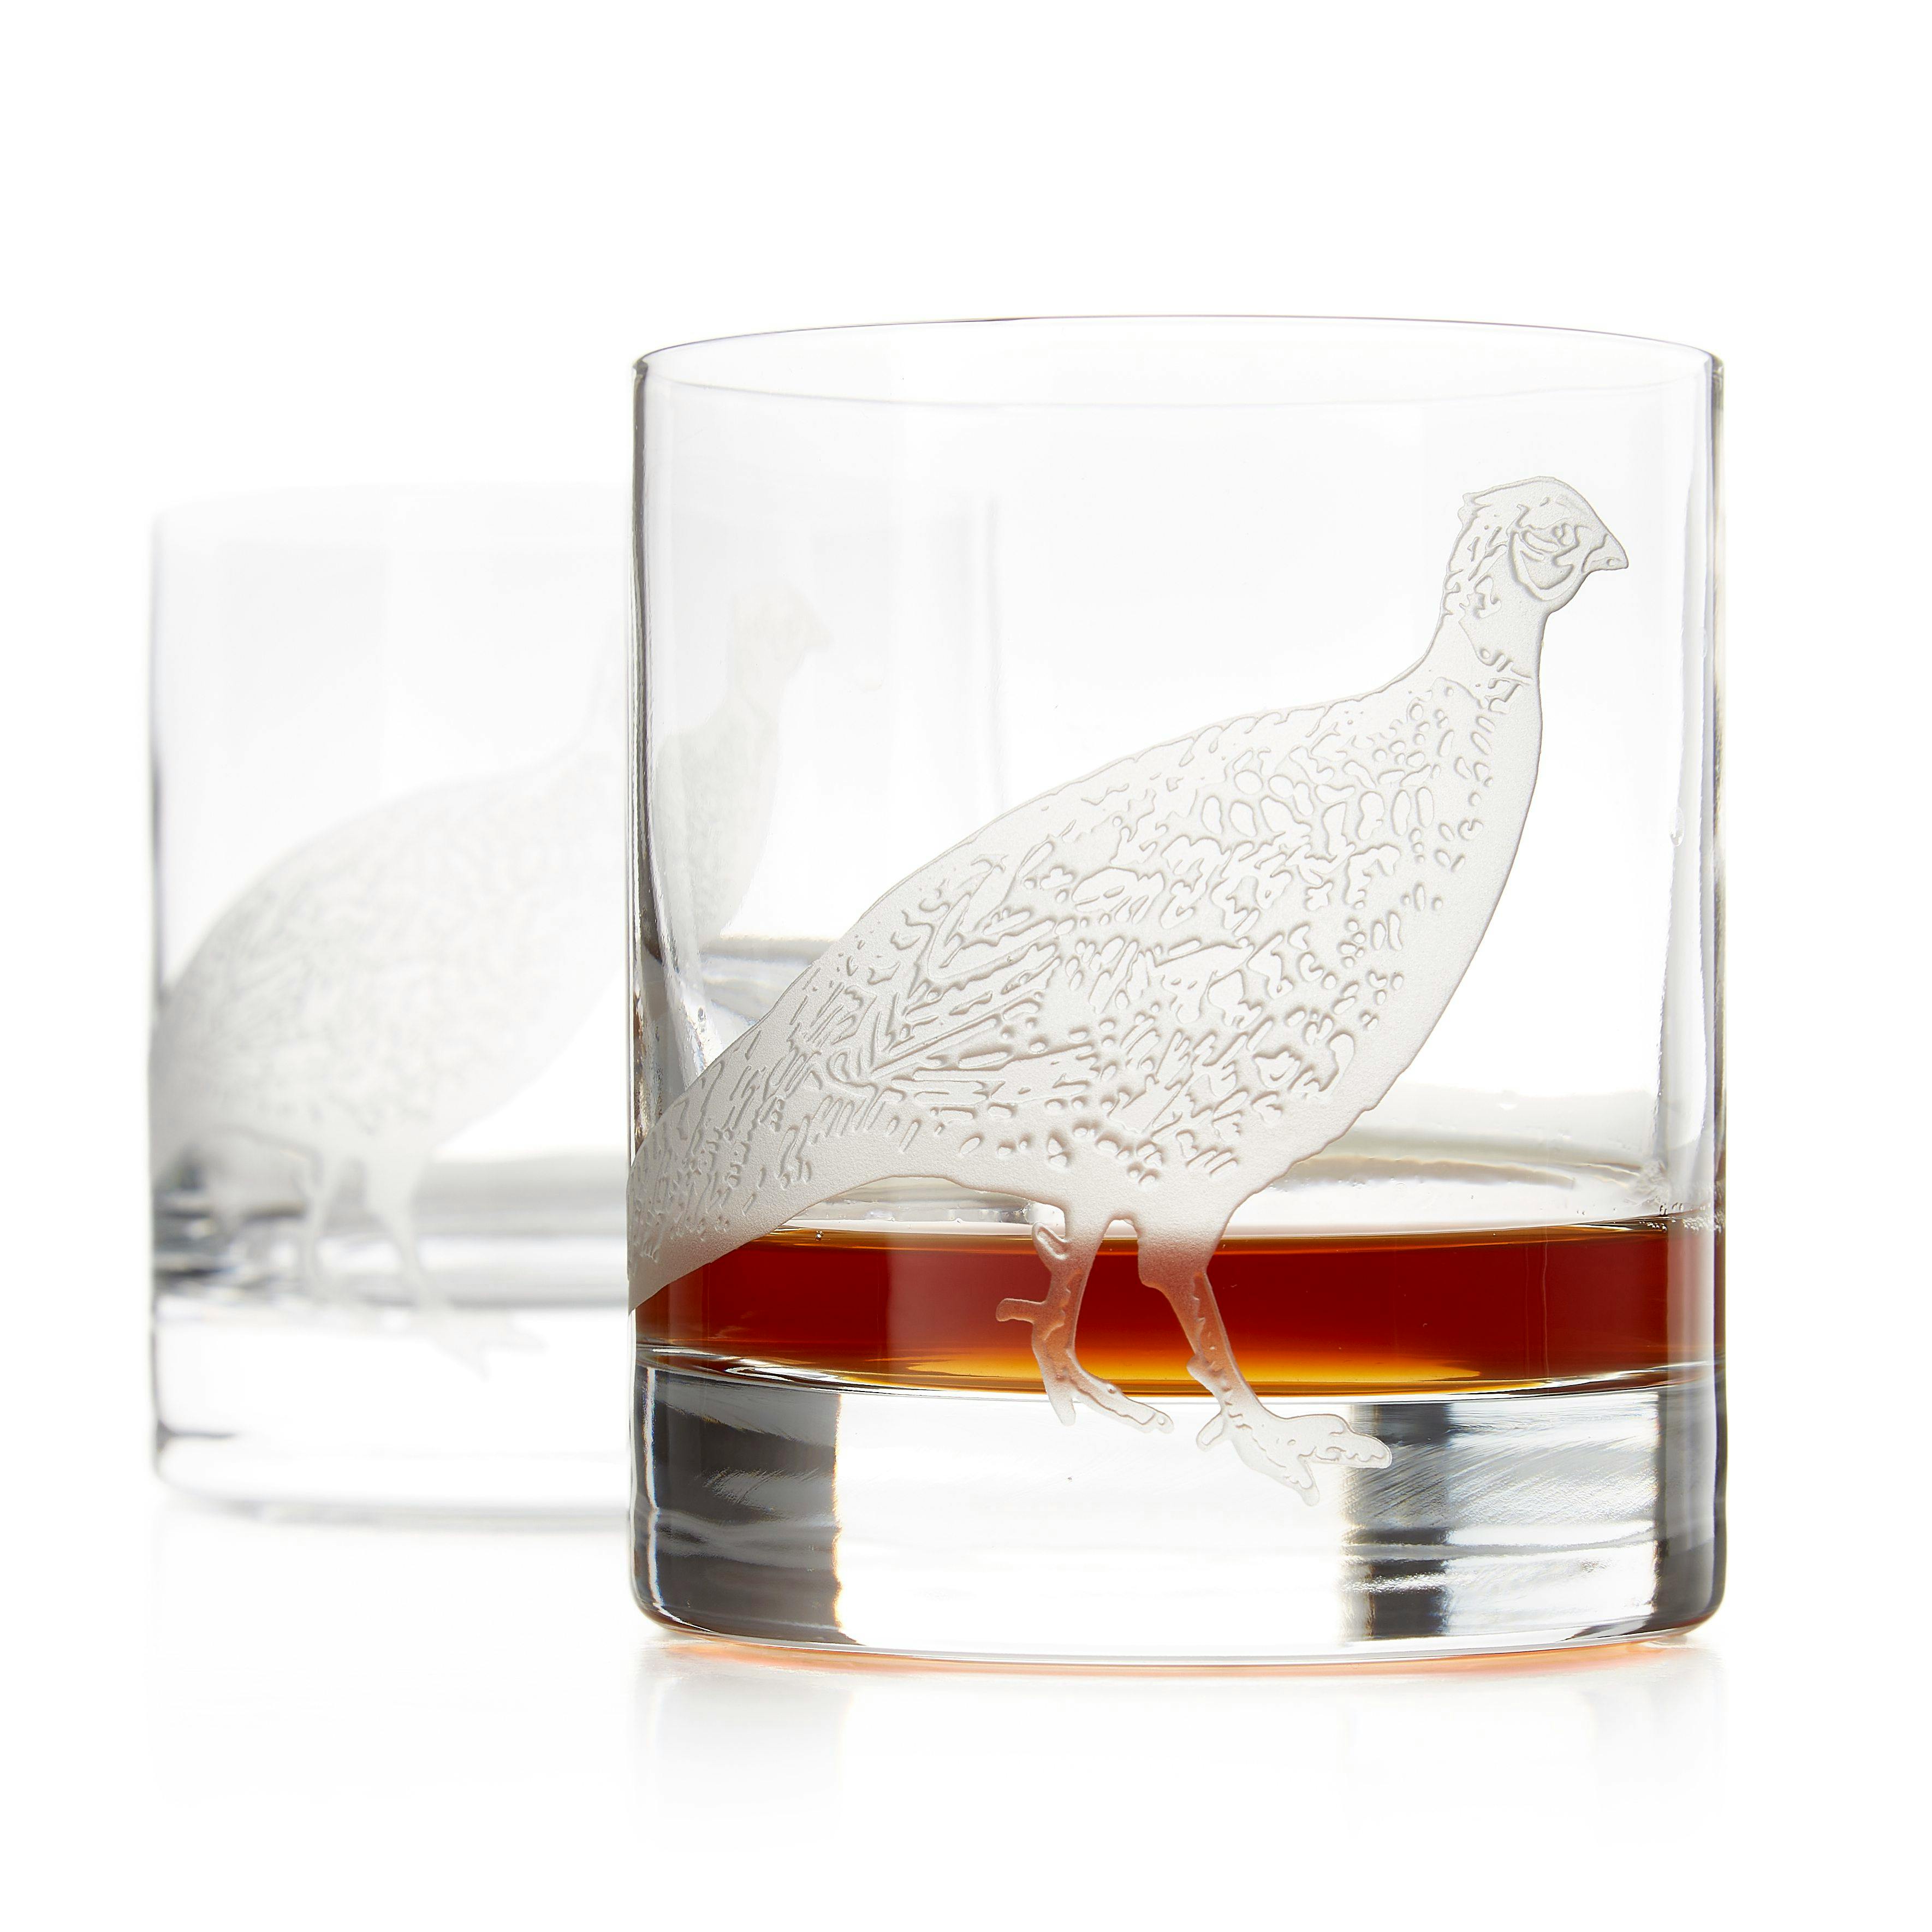 The JEP Whiskey Glass - Set of 2